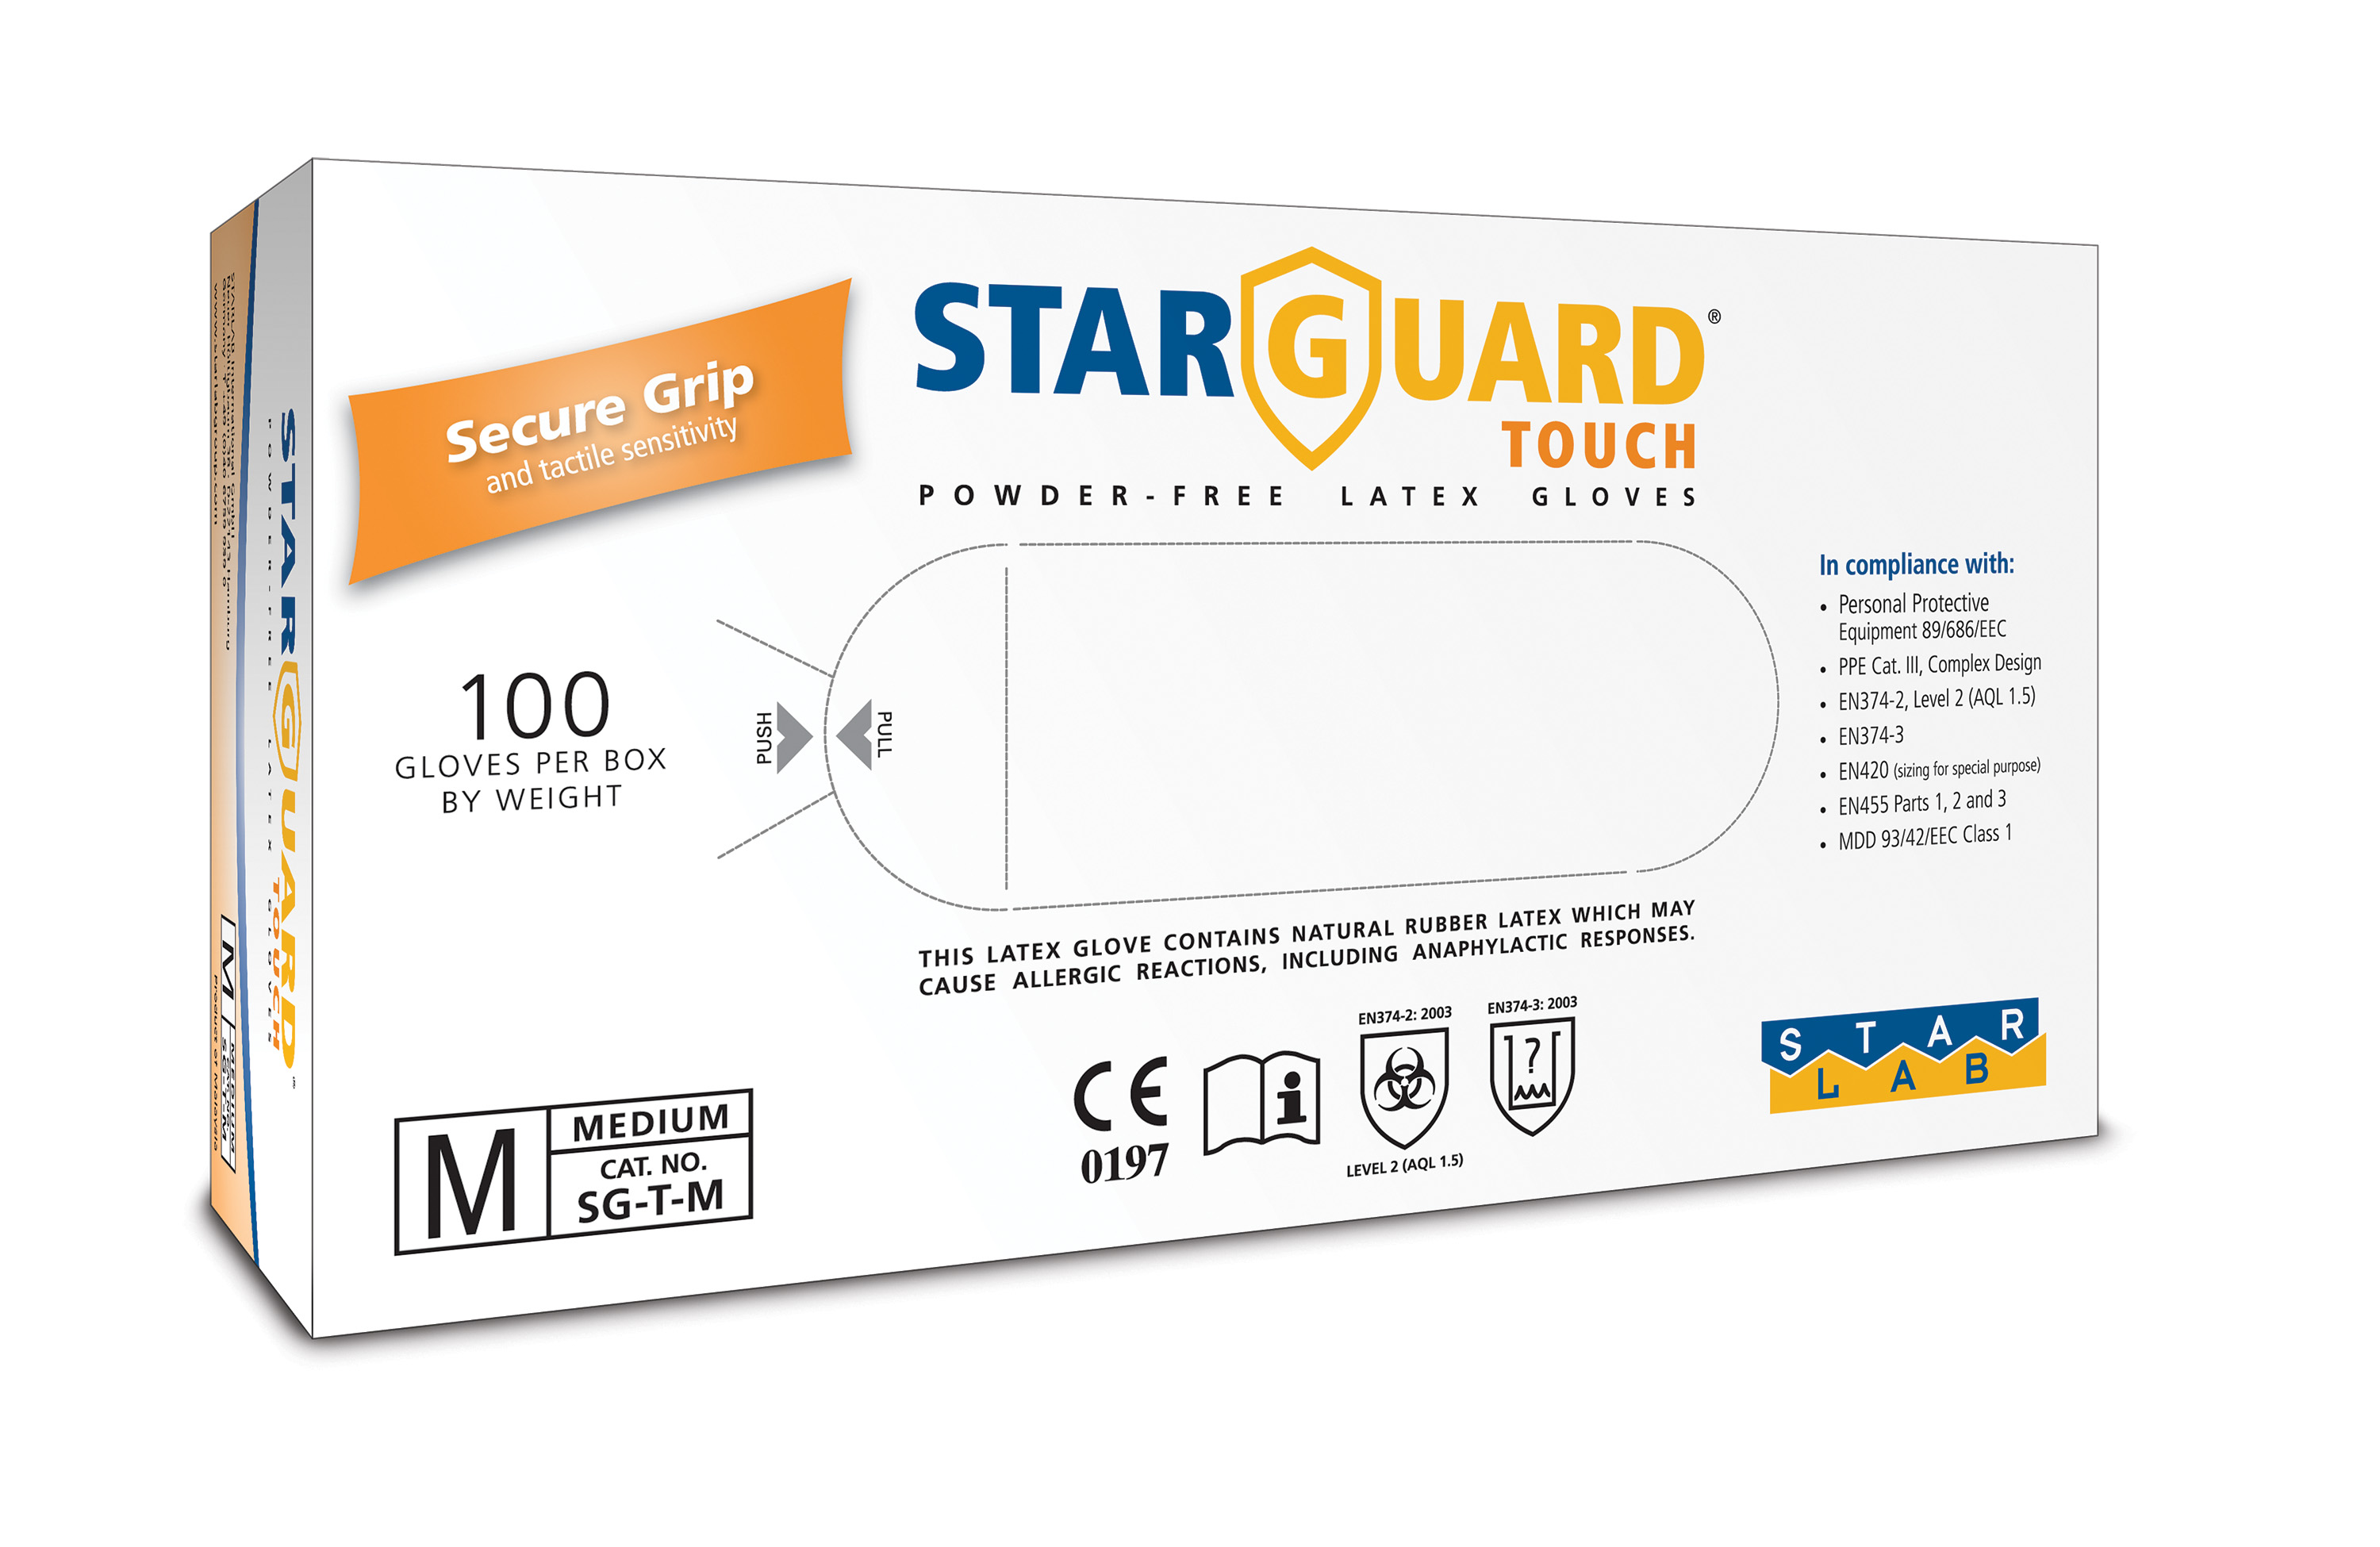 StarGuard TOUCH Latex Gloves, Powder Free, Natural, Size XS, Pk/ 10 x 100 gloves.